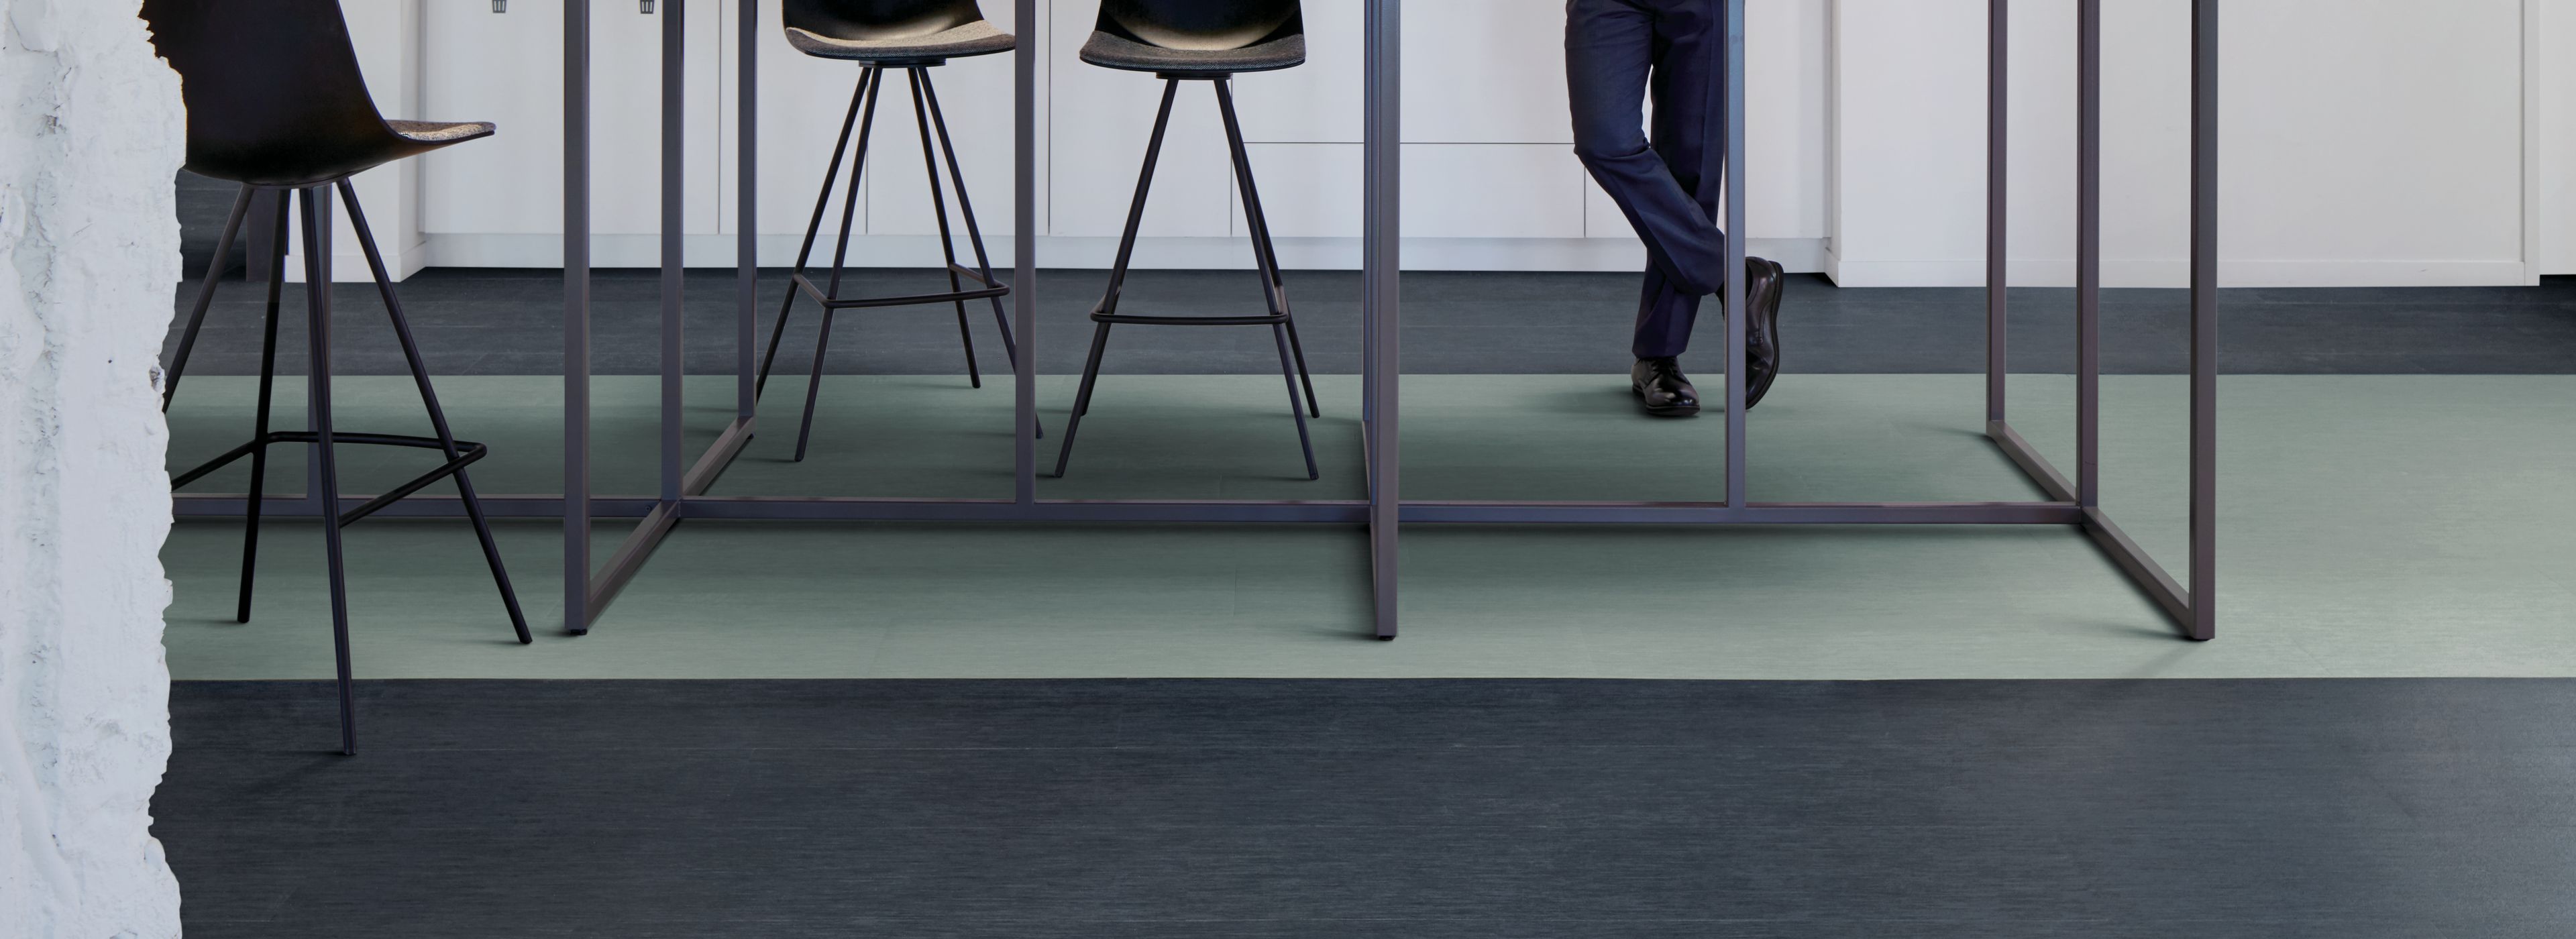 Interface Brushed Lines LVT in common works space with high top table número de imagen 1